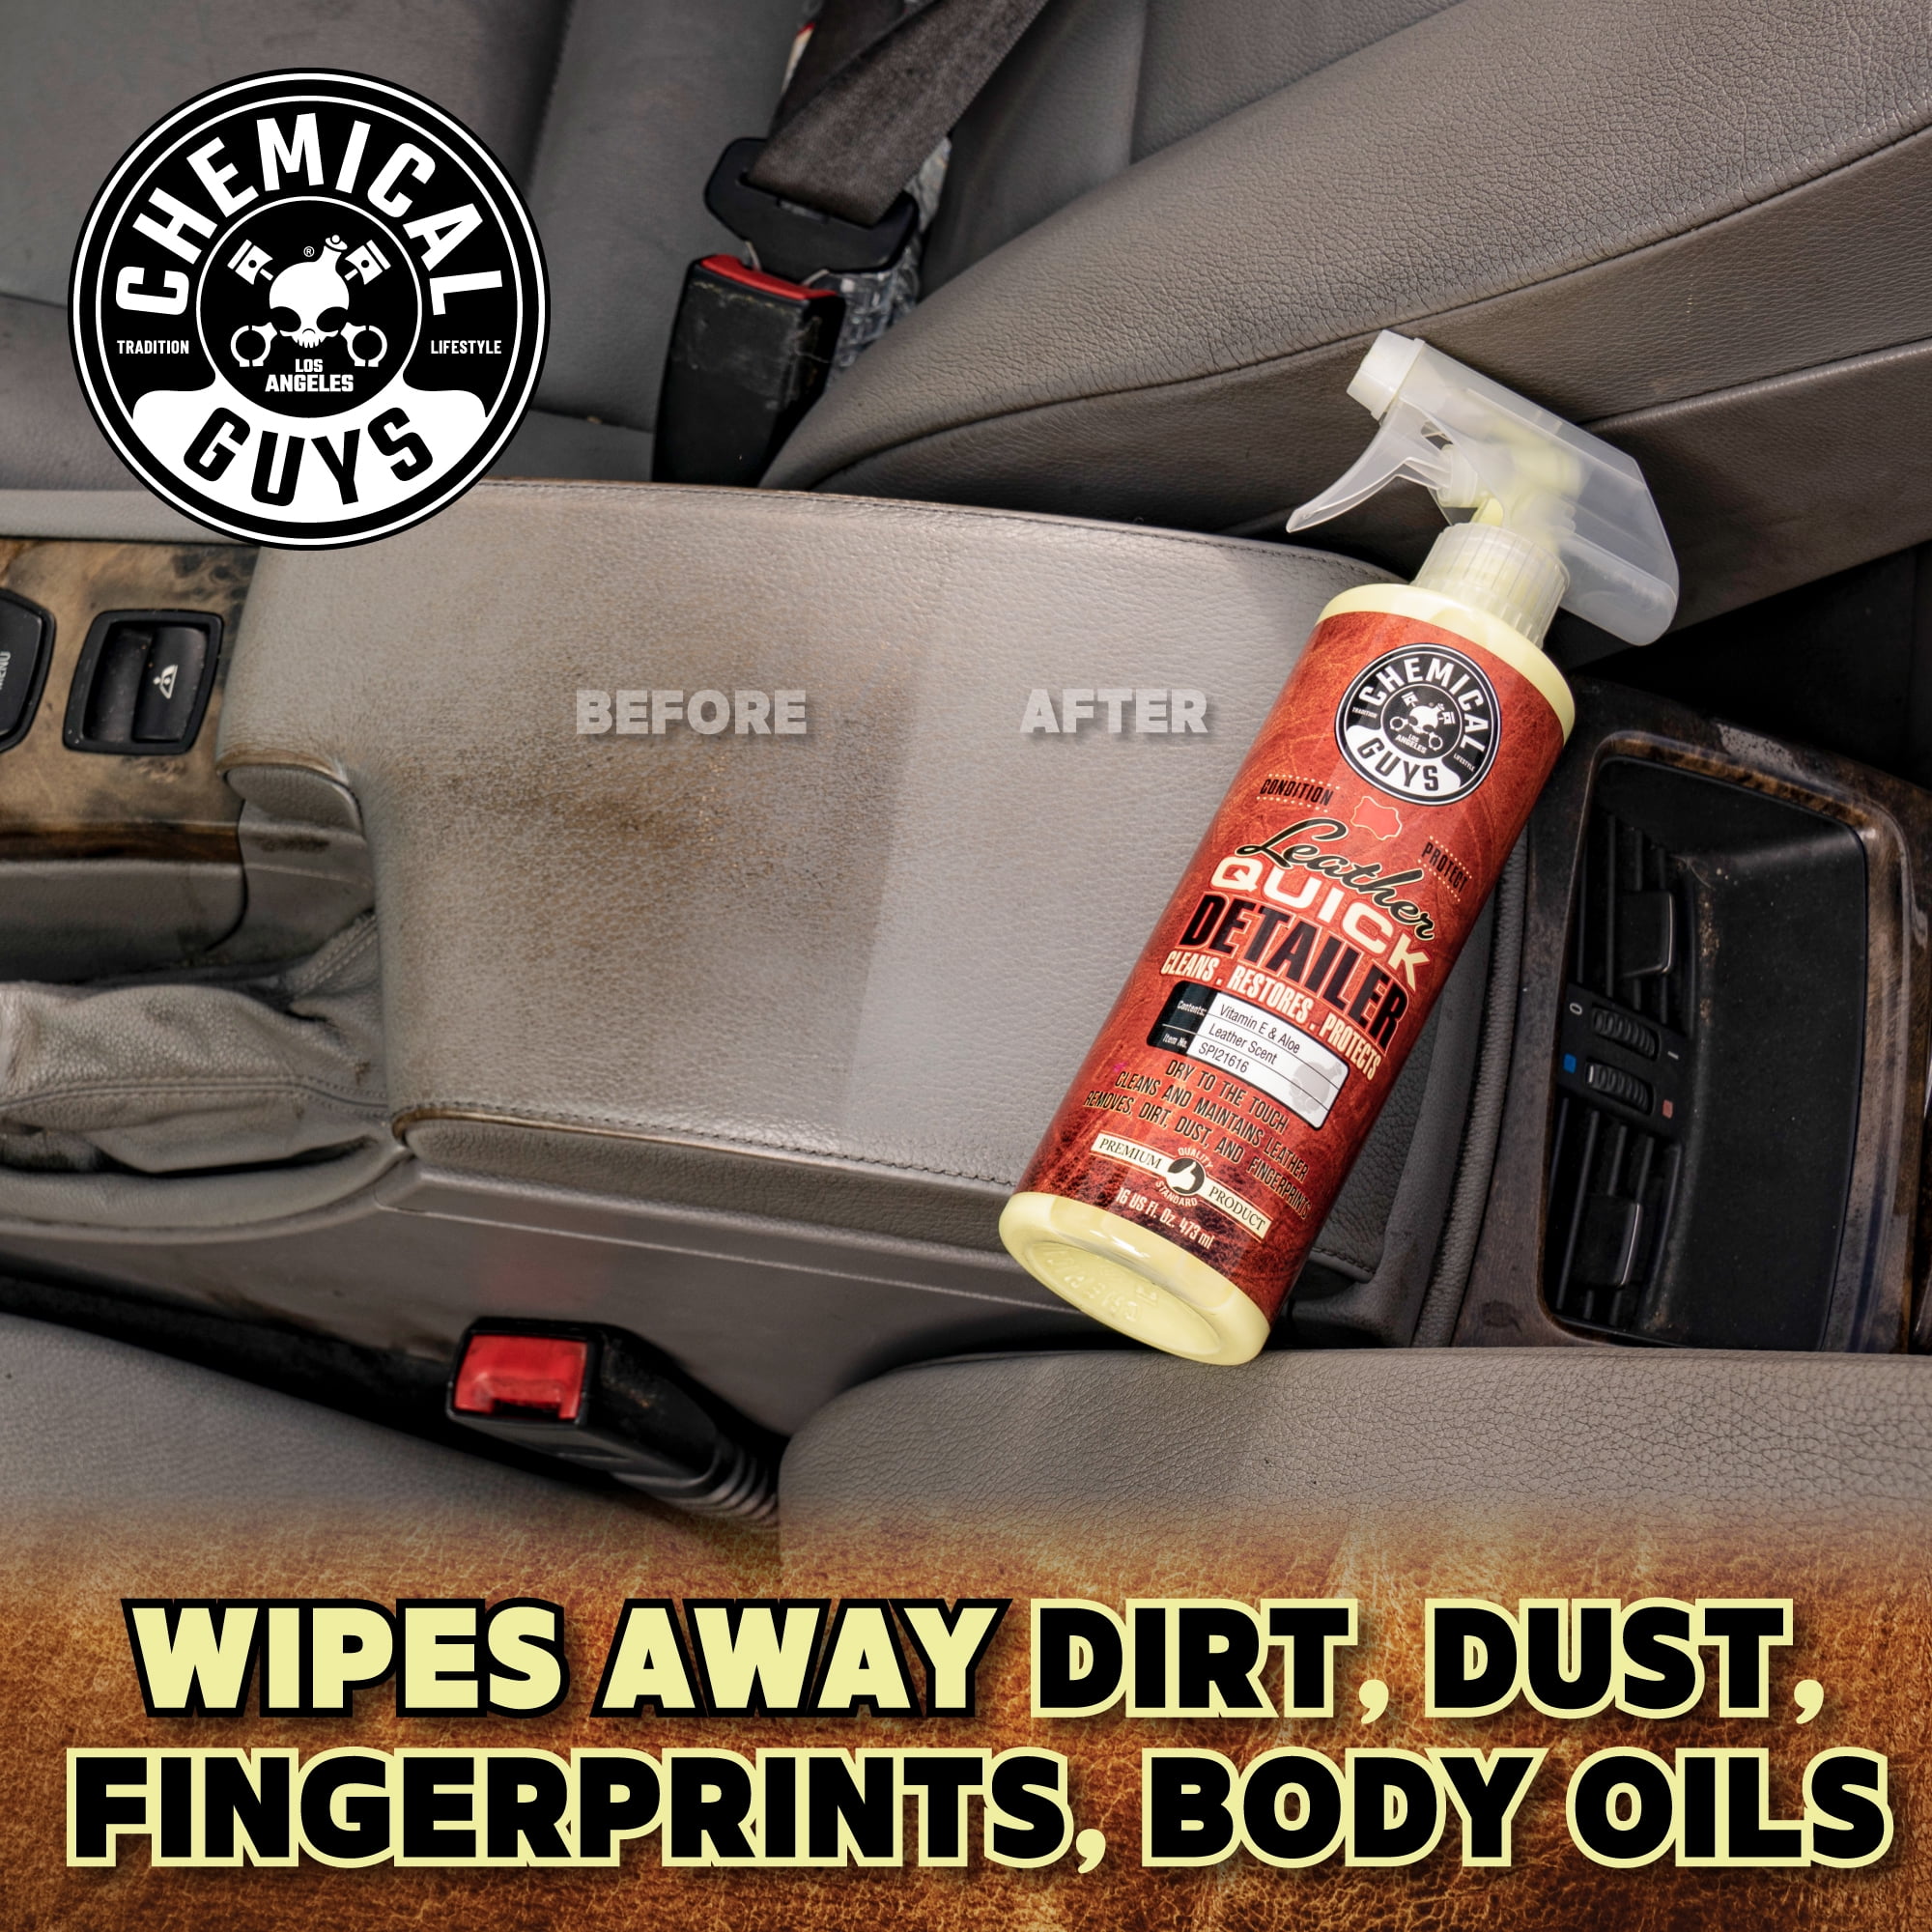 Chemical Guys Quick Detailer, Synthetic - 16 fl oz